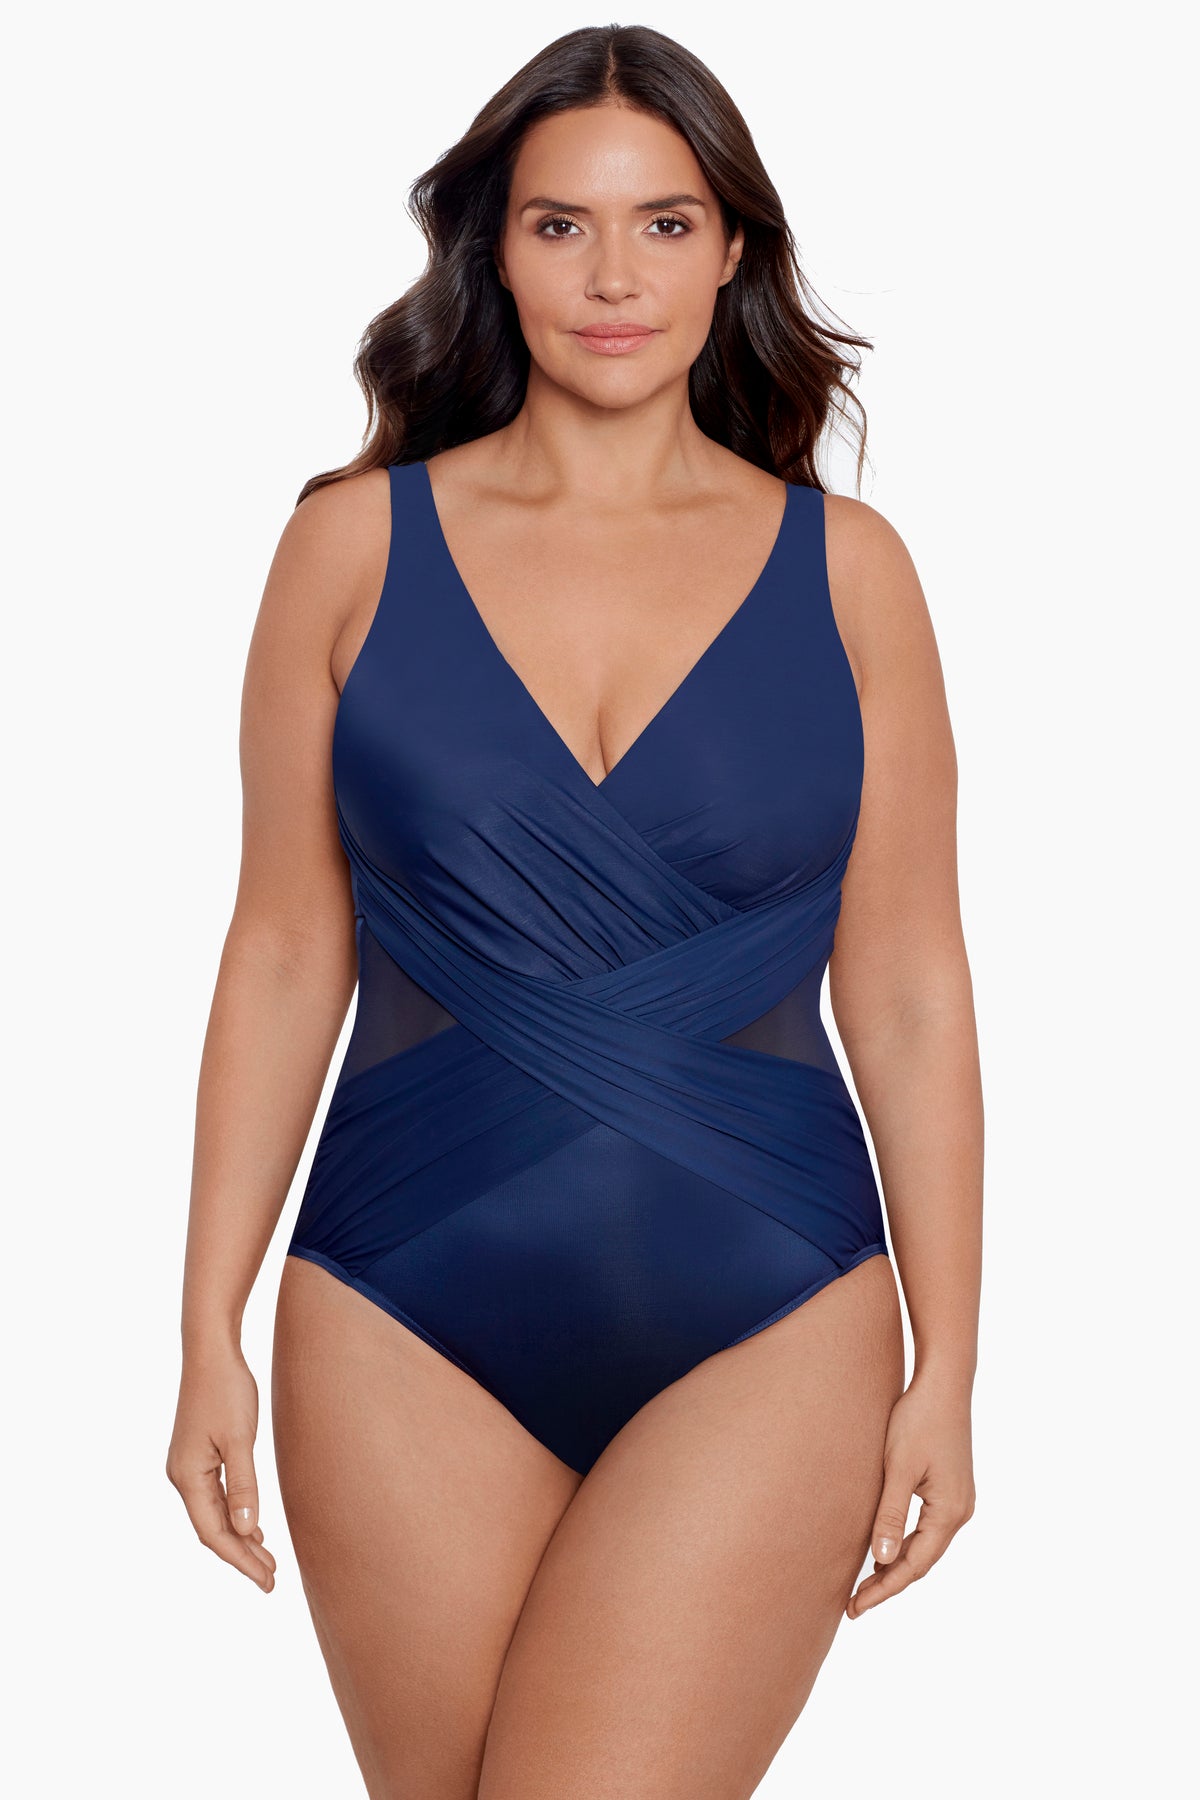 Shop for Miraclesuit, Swimsuits, Swimwear, Womens